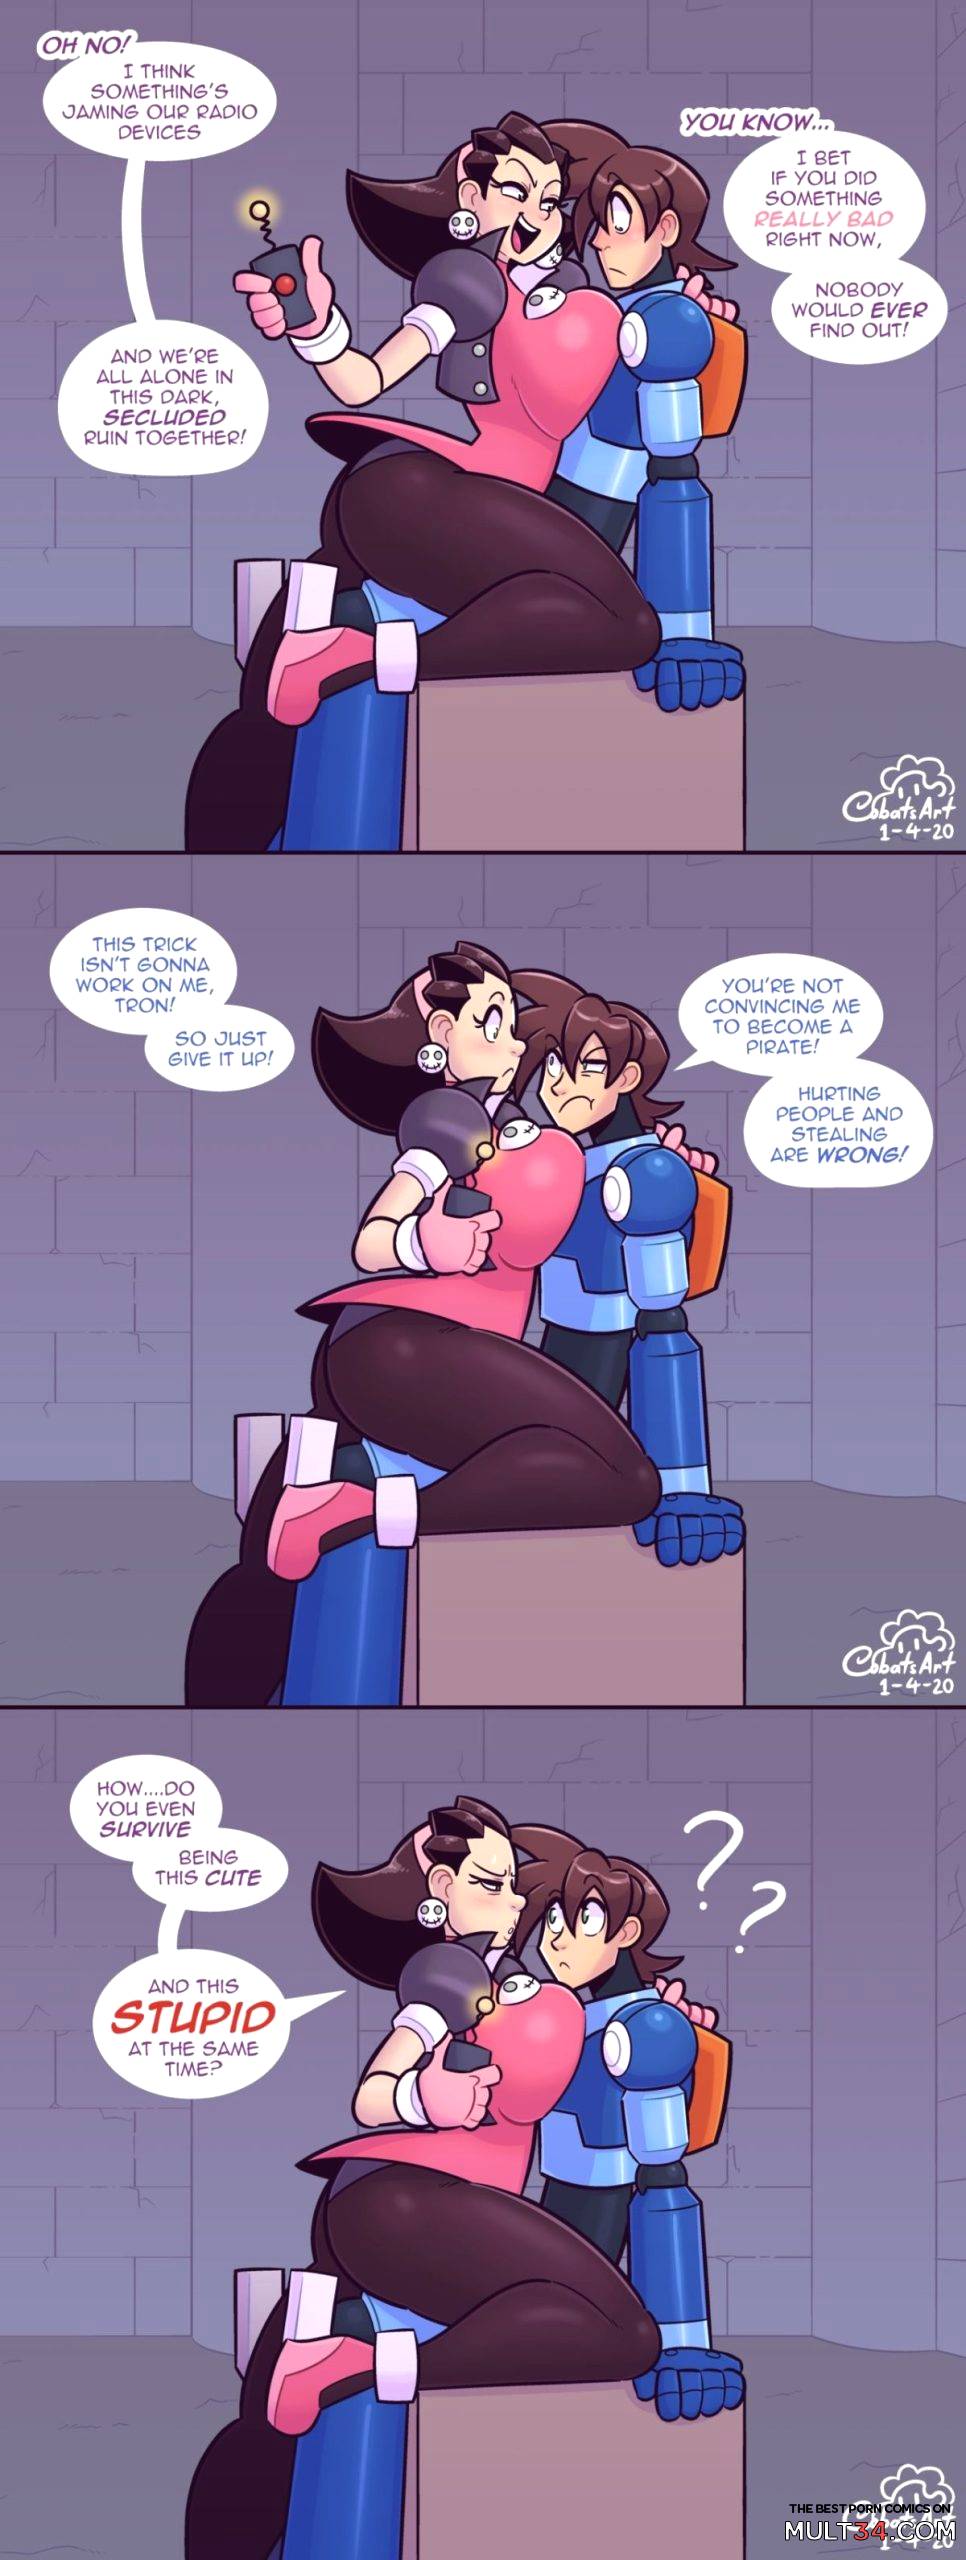 MegaMan and Tron Bonne (Fixed and Updated) page 4